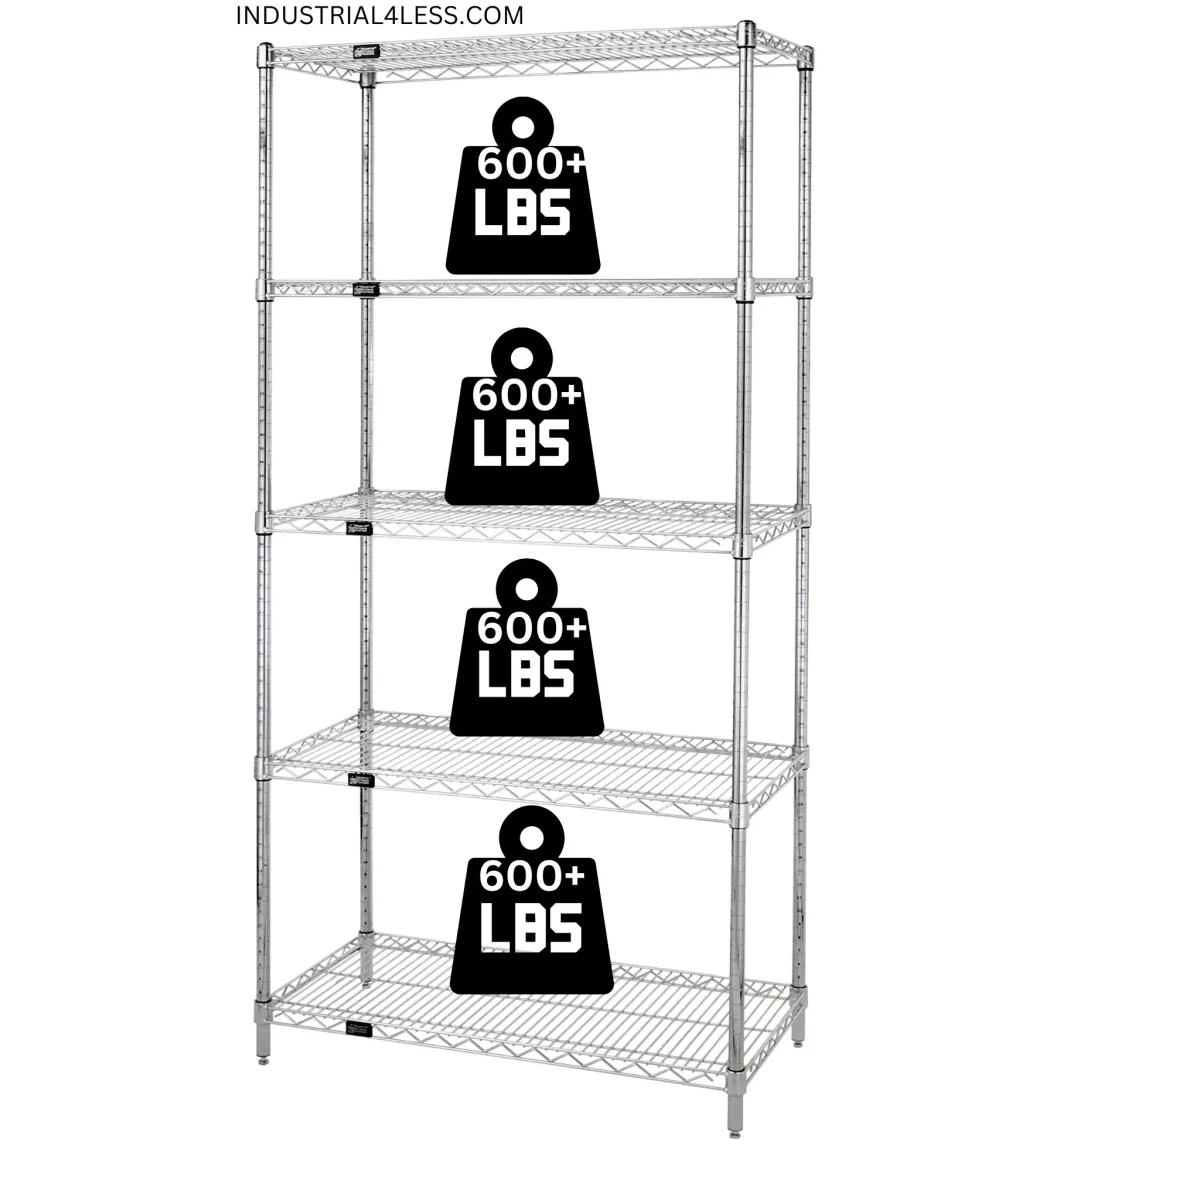 24" x 60" Stainless Steel Wire Shelving Unit - Industrial 4 Less - 24605S-5